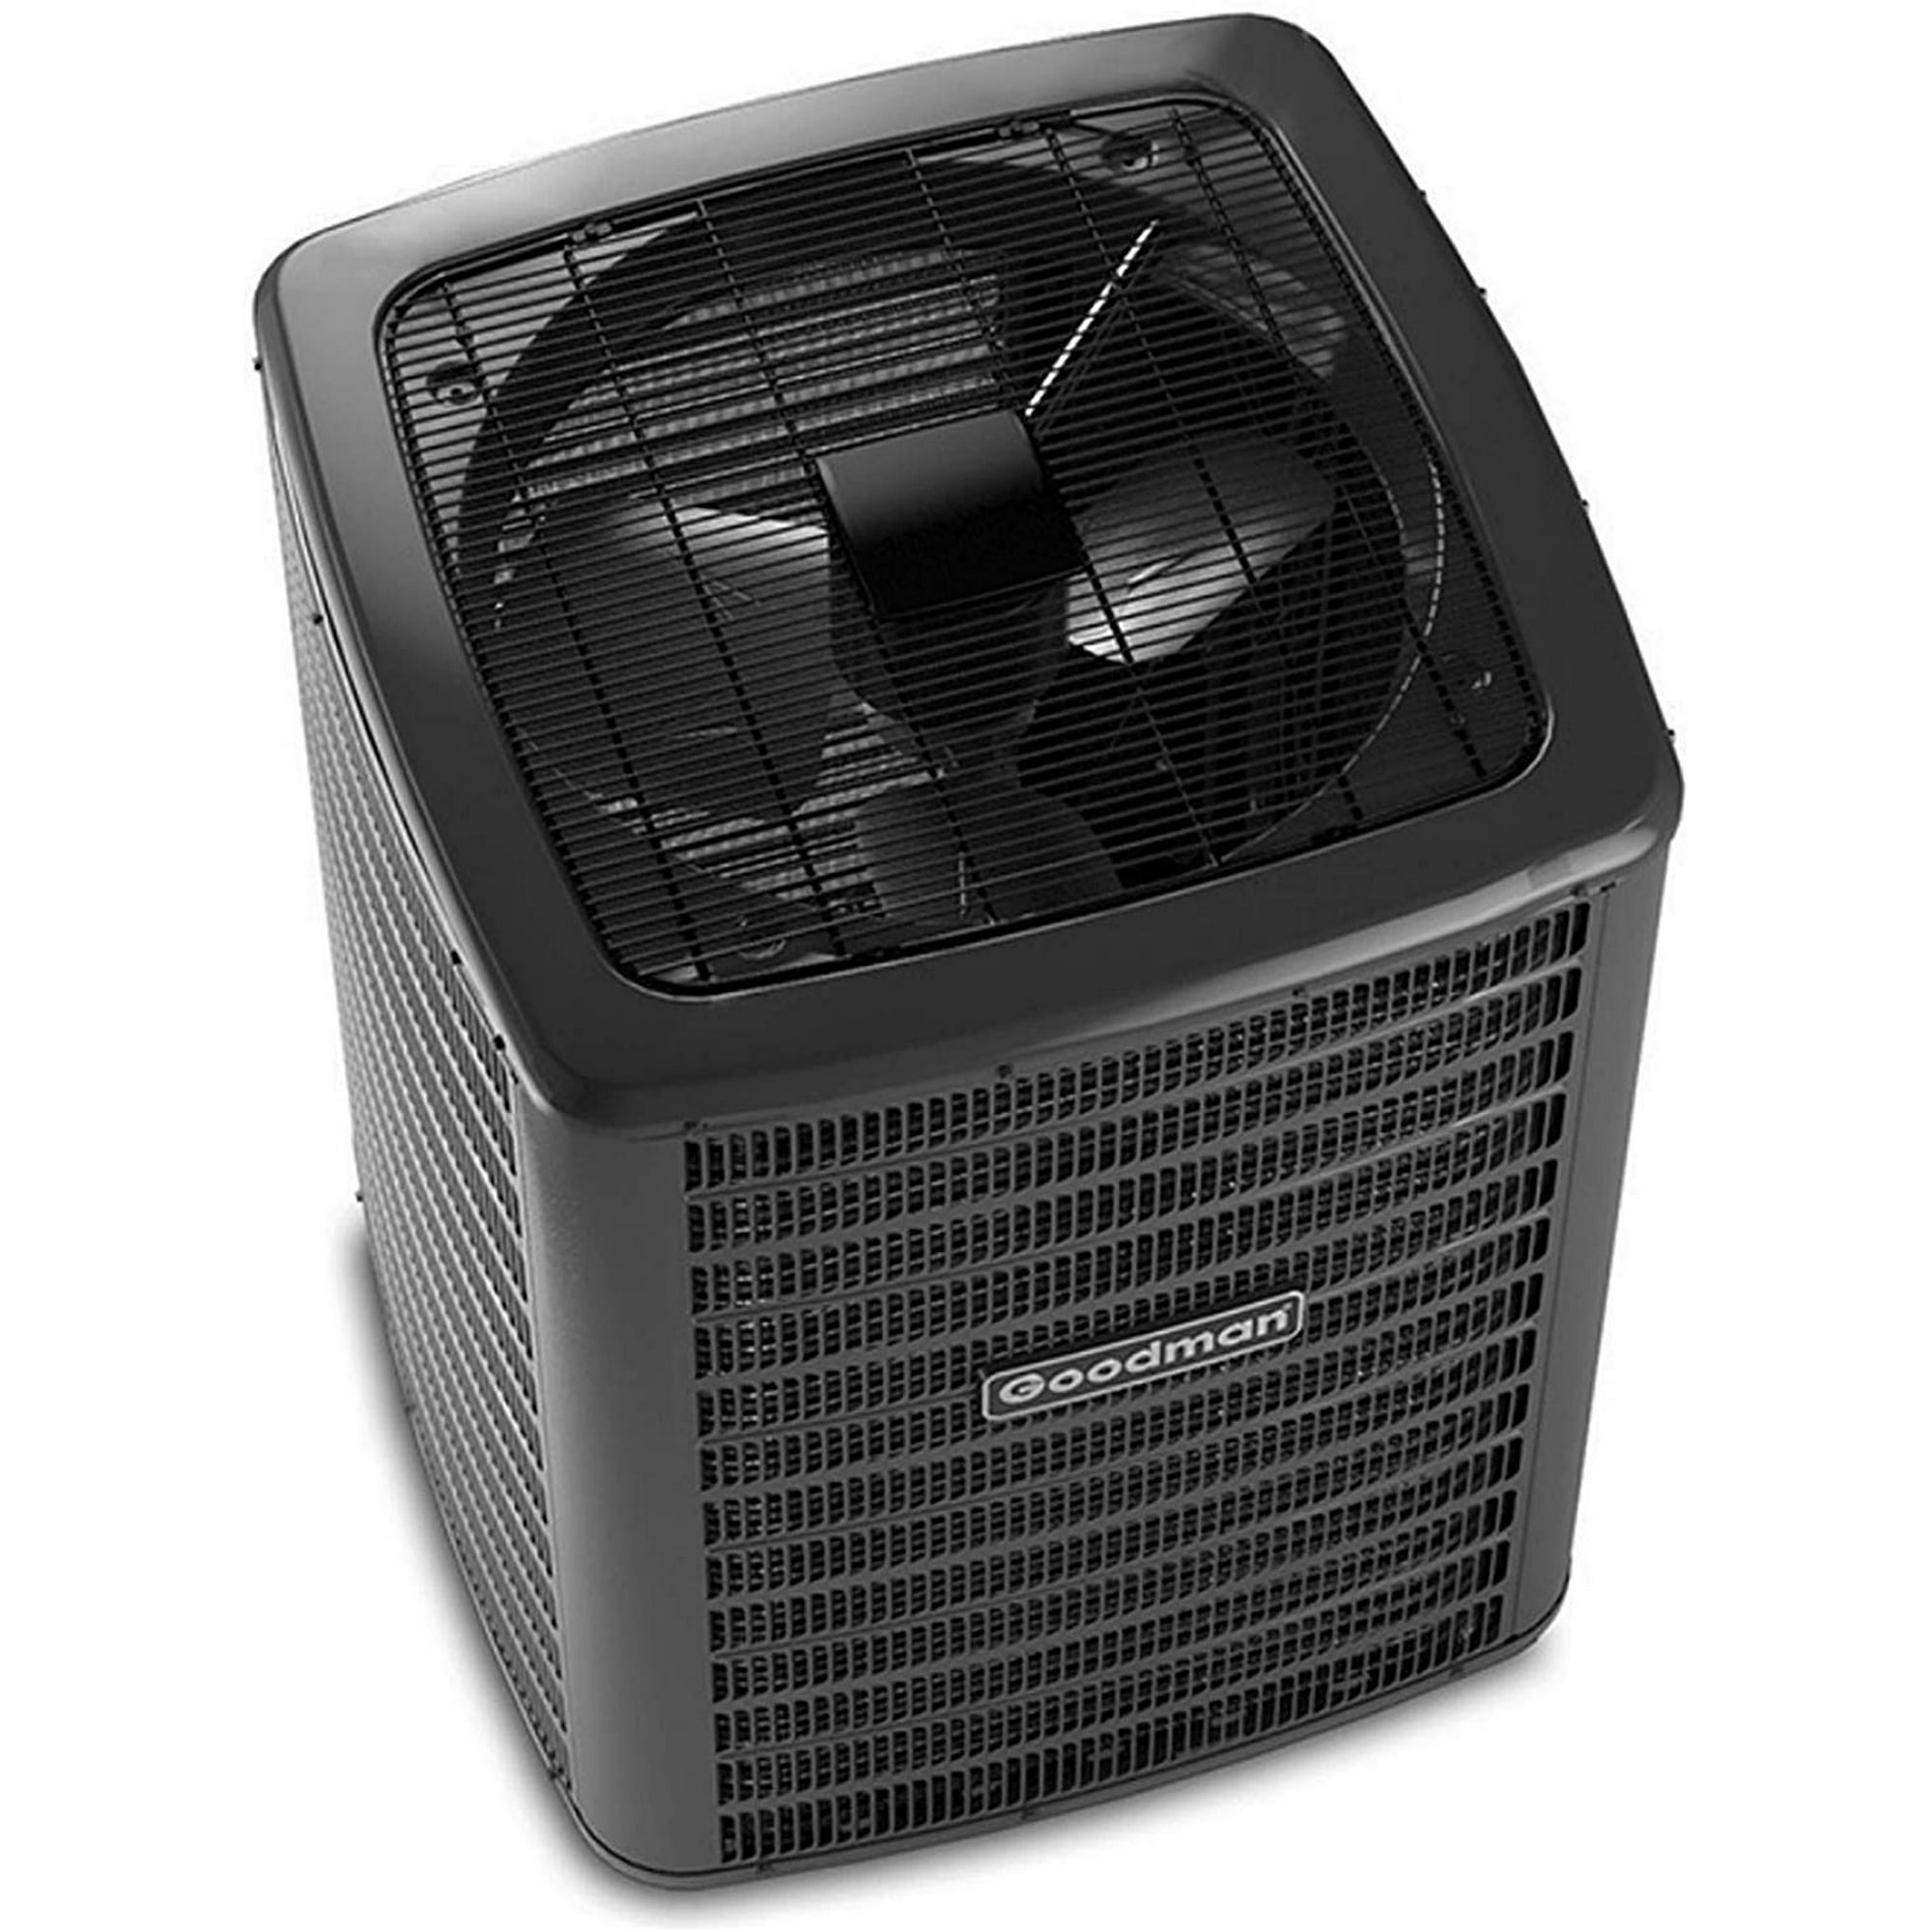 Gsxc160241 Goodman Air Conditioner 2 Ton 71 Dbs 16 Seer Two Stage Air Conditioner G Series Walmart Canada